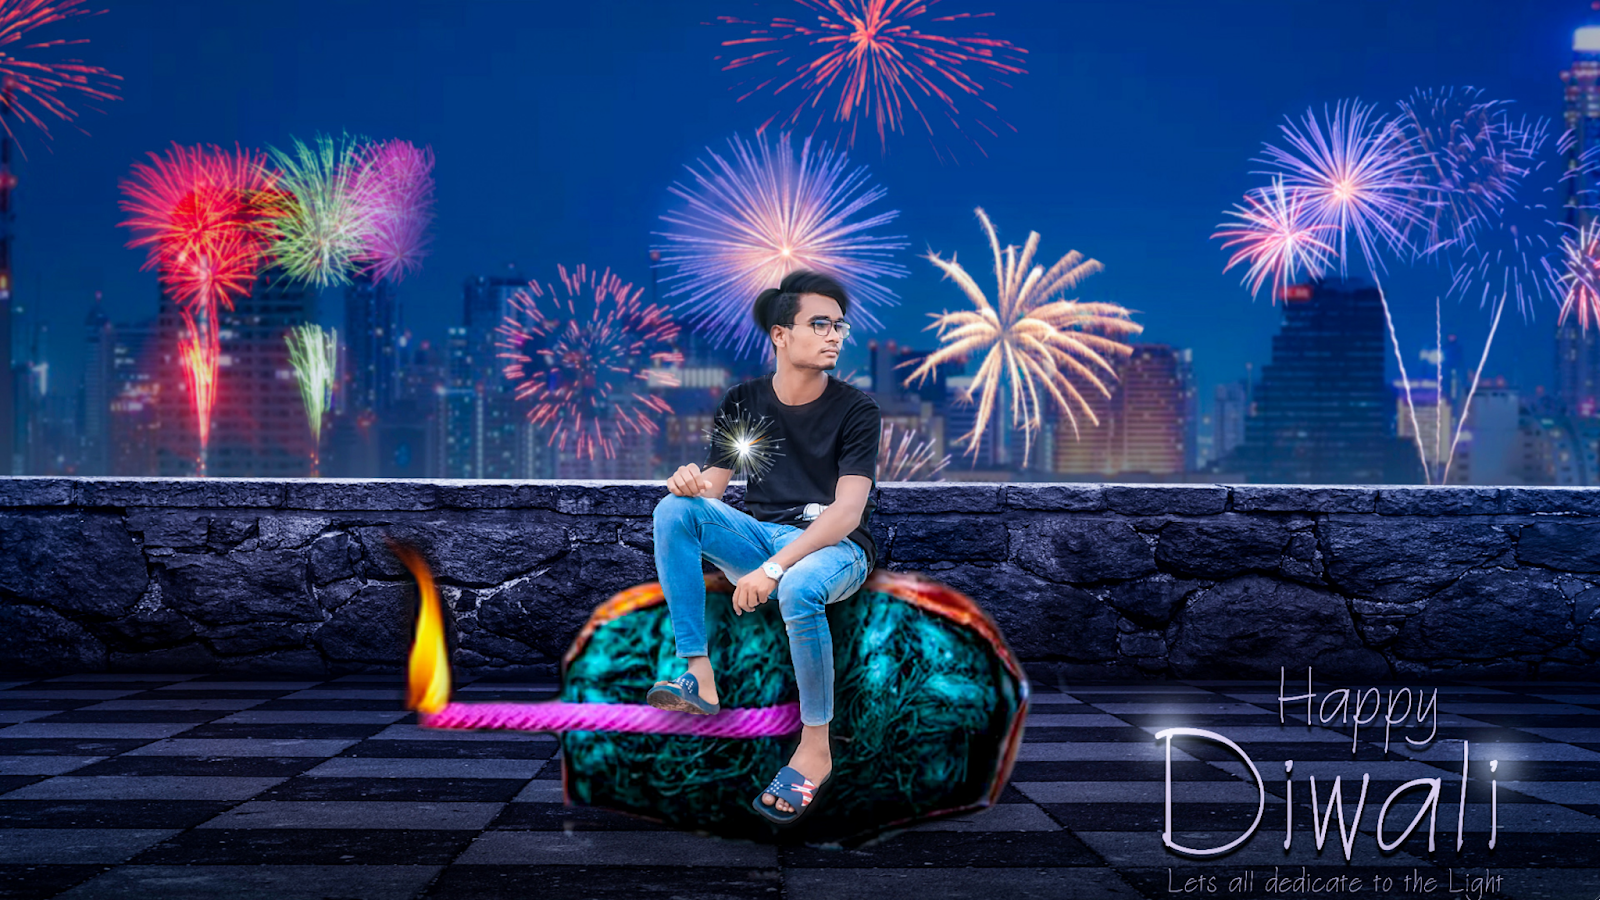 39+ Diwali Photo Editing Background Png 2020 Pictures